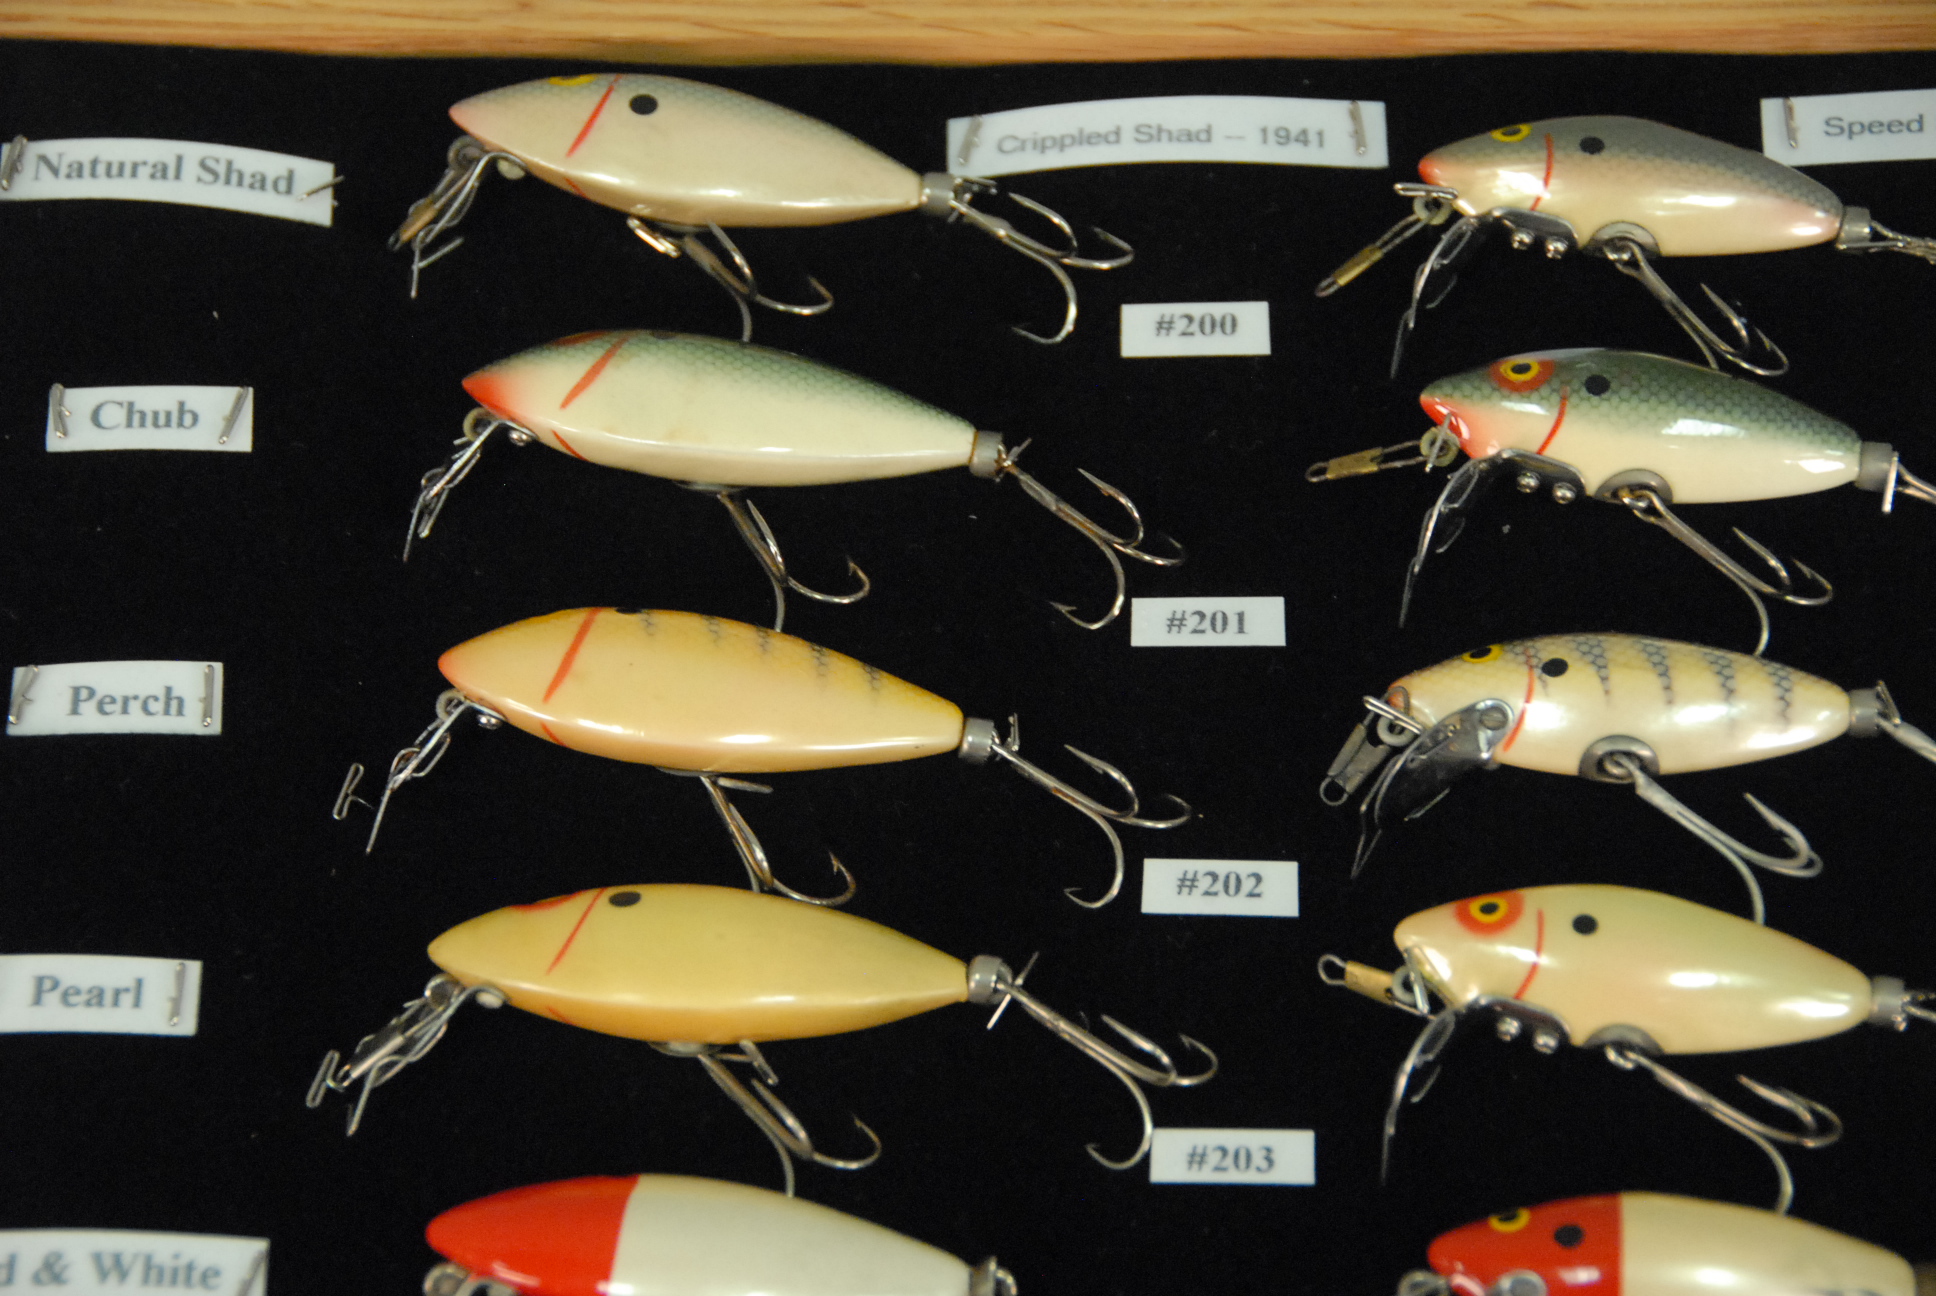 Lot 184: Two cases with twenty-nine True Temper Al Foss shad lures